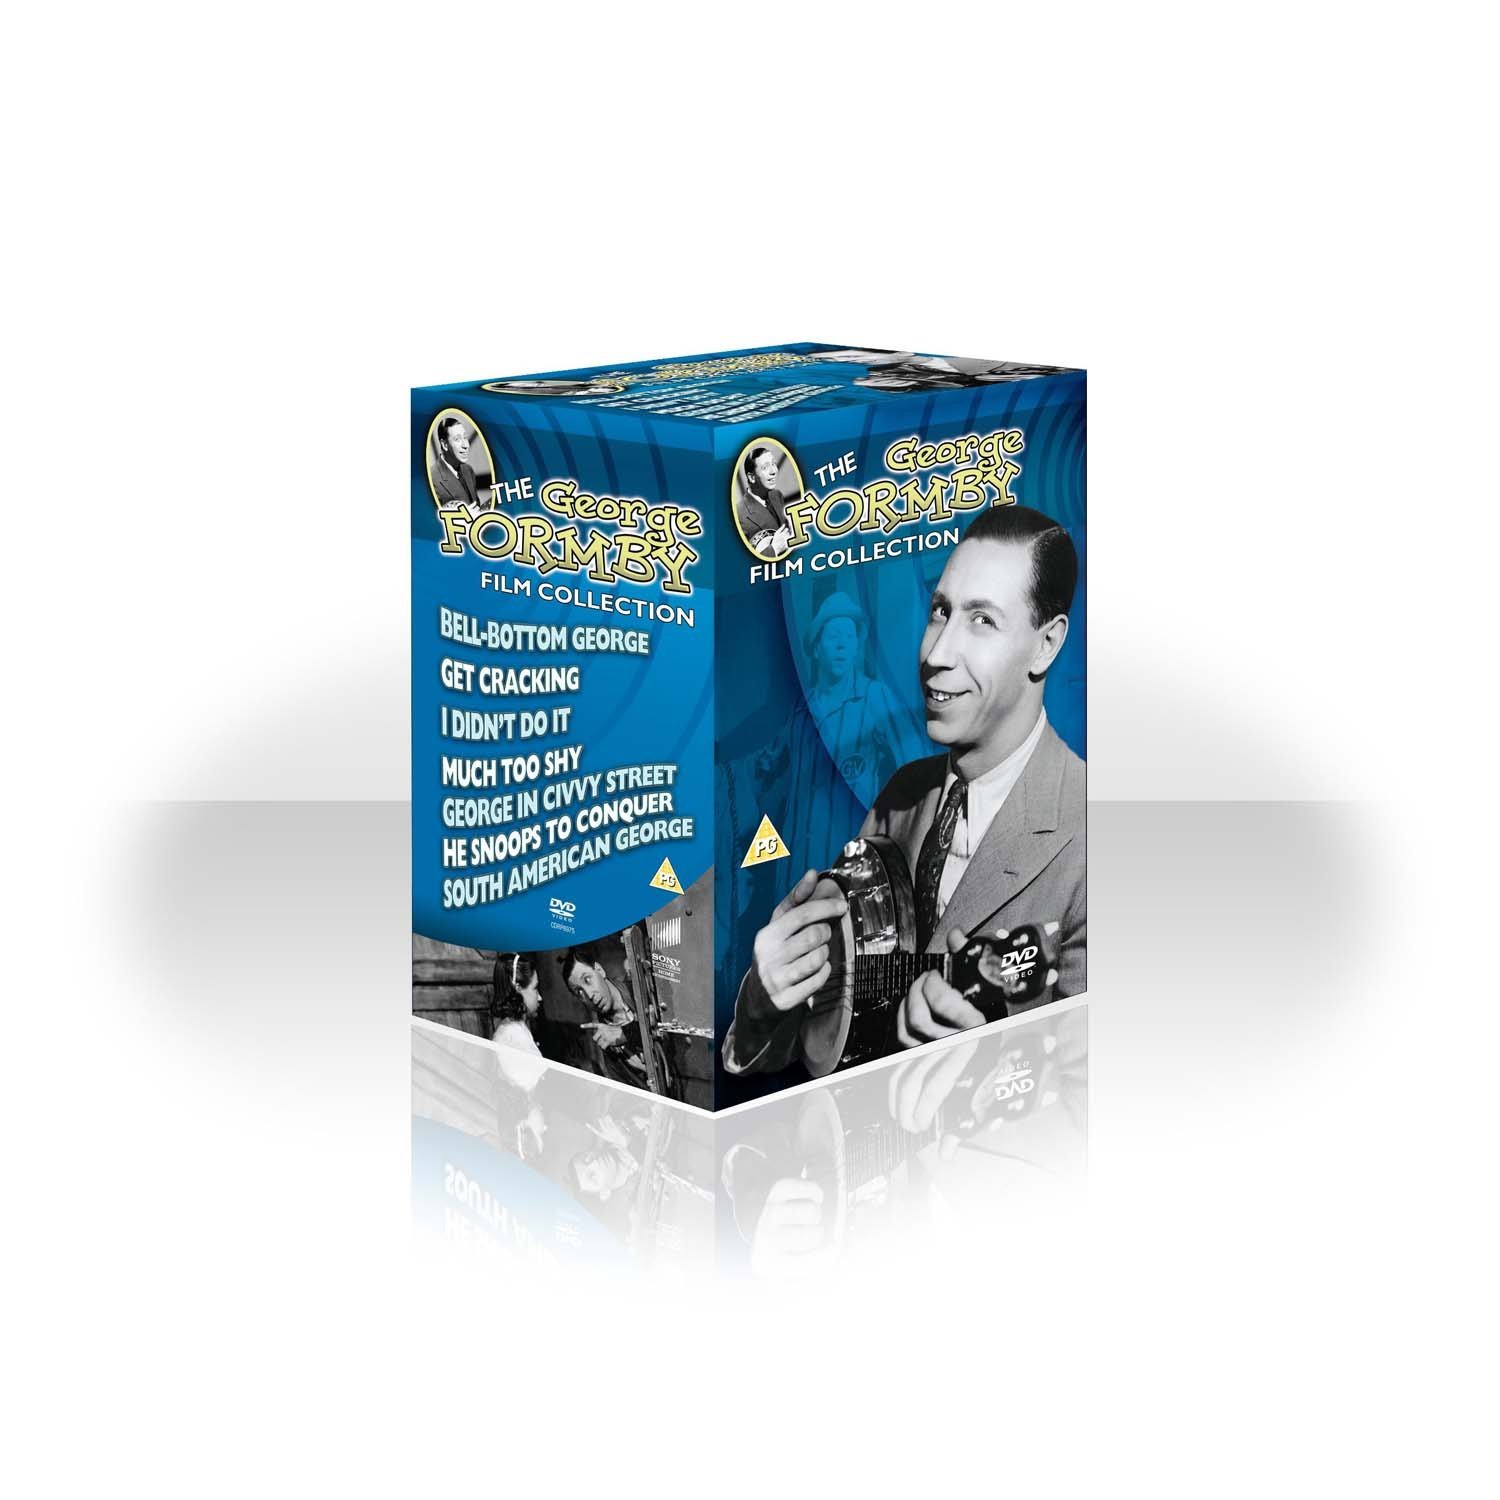 The George Formby Film Collection (DVD)